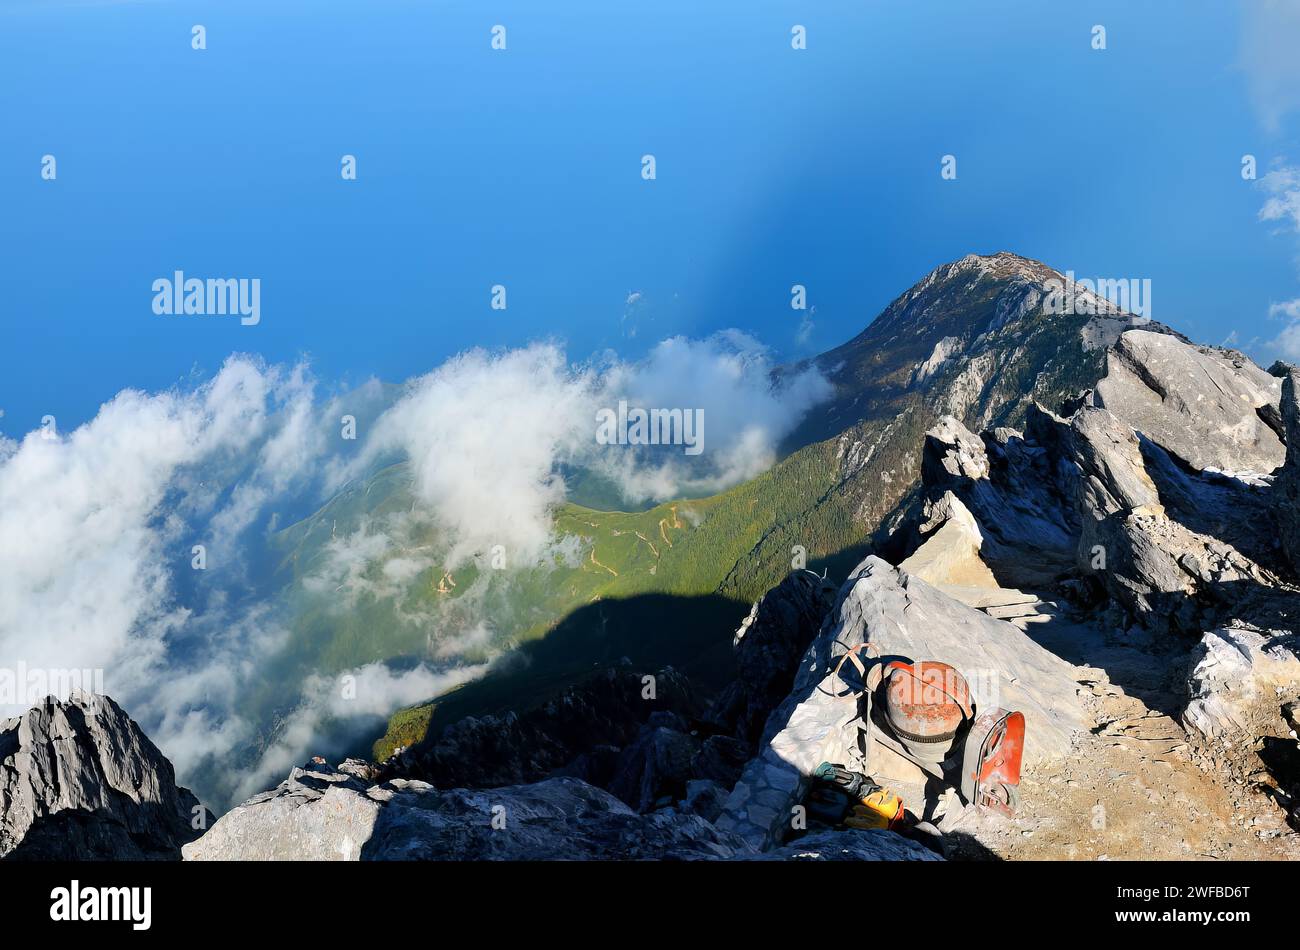 Climbers ascend a mountain with backpacks Stock Photo